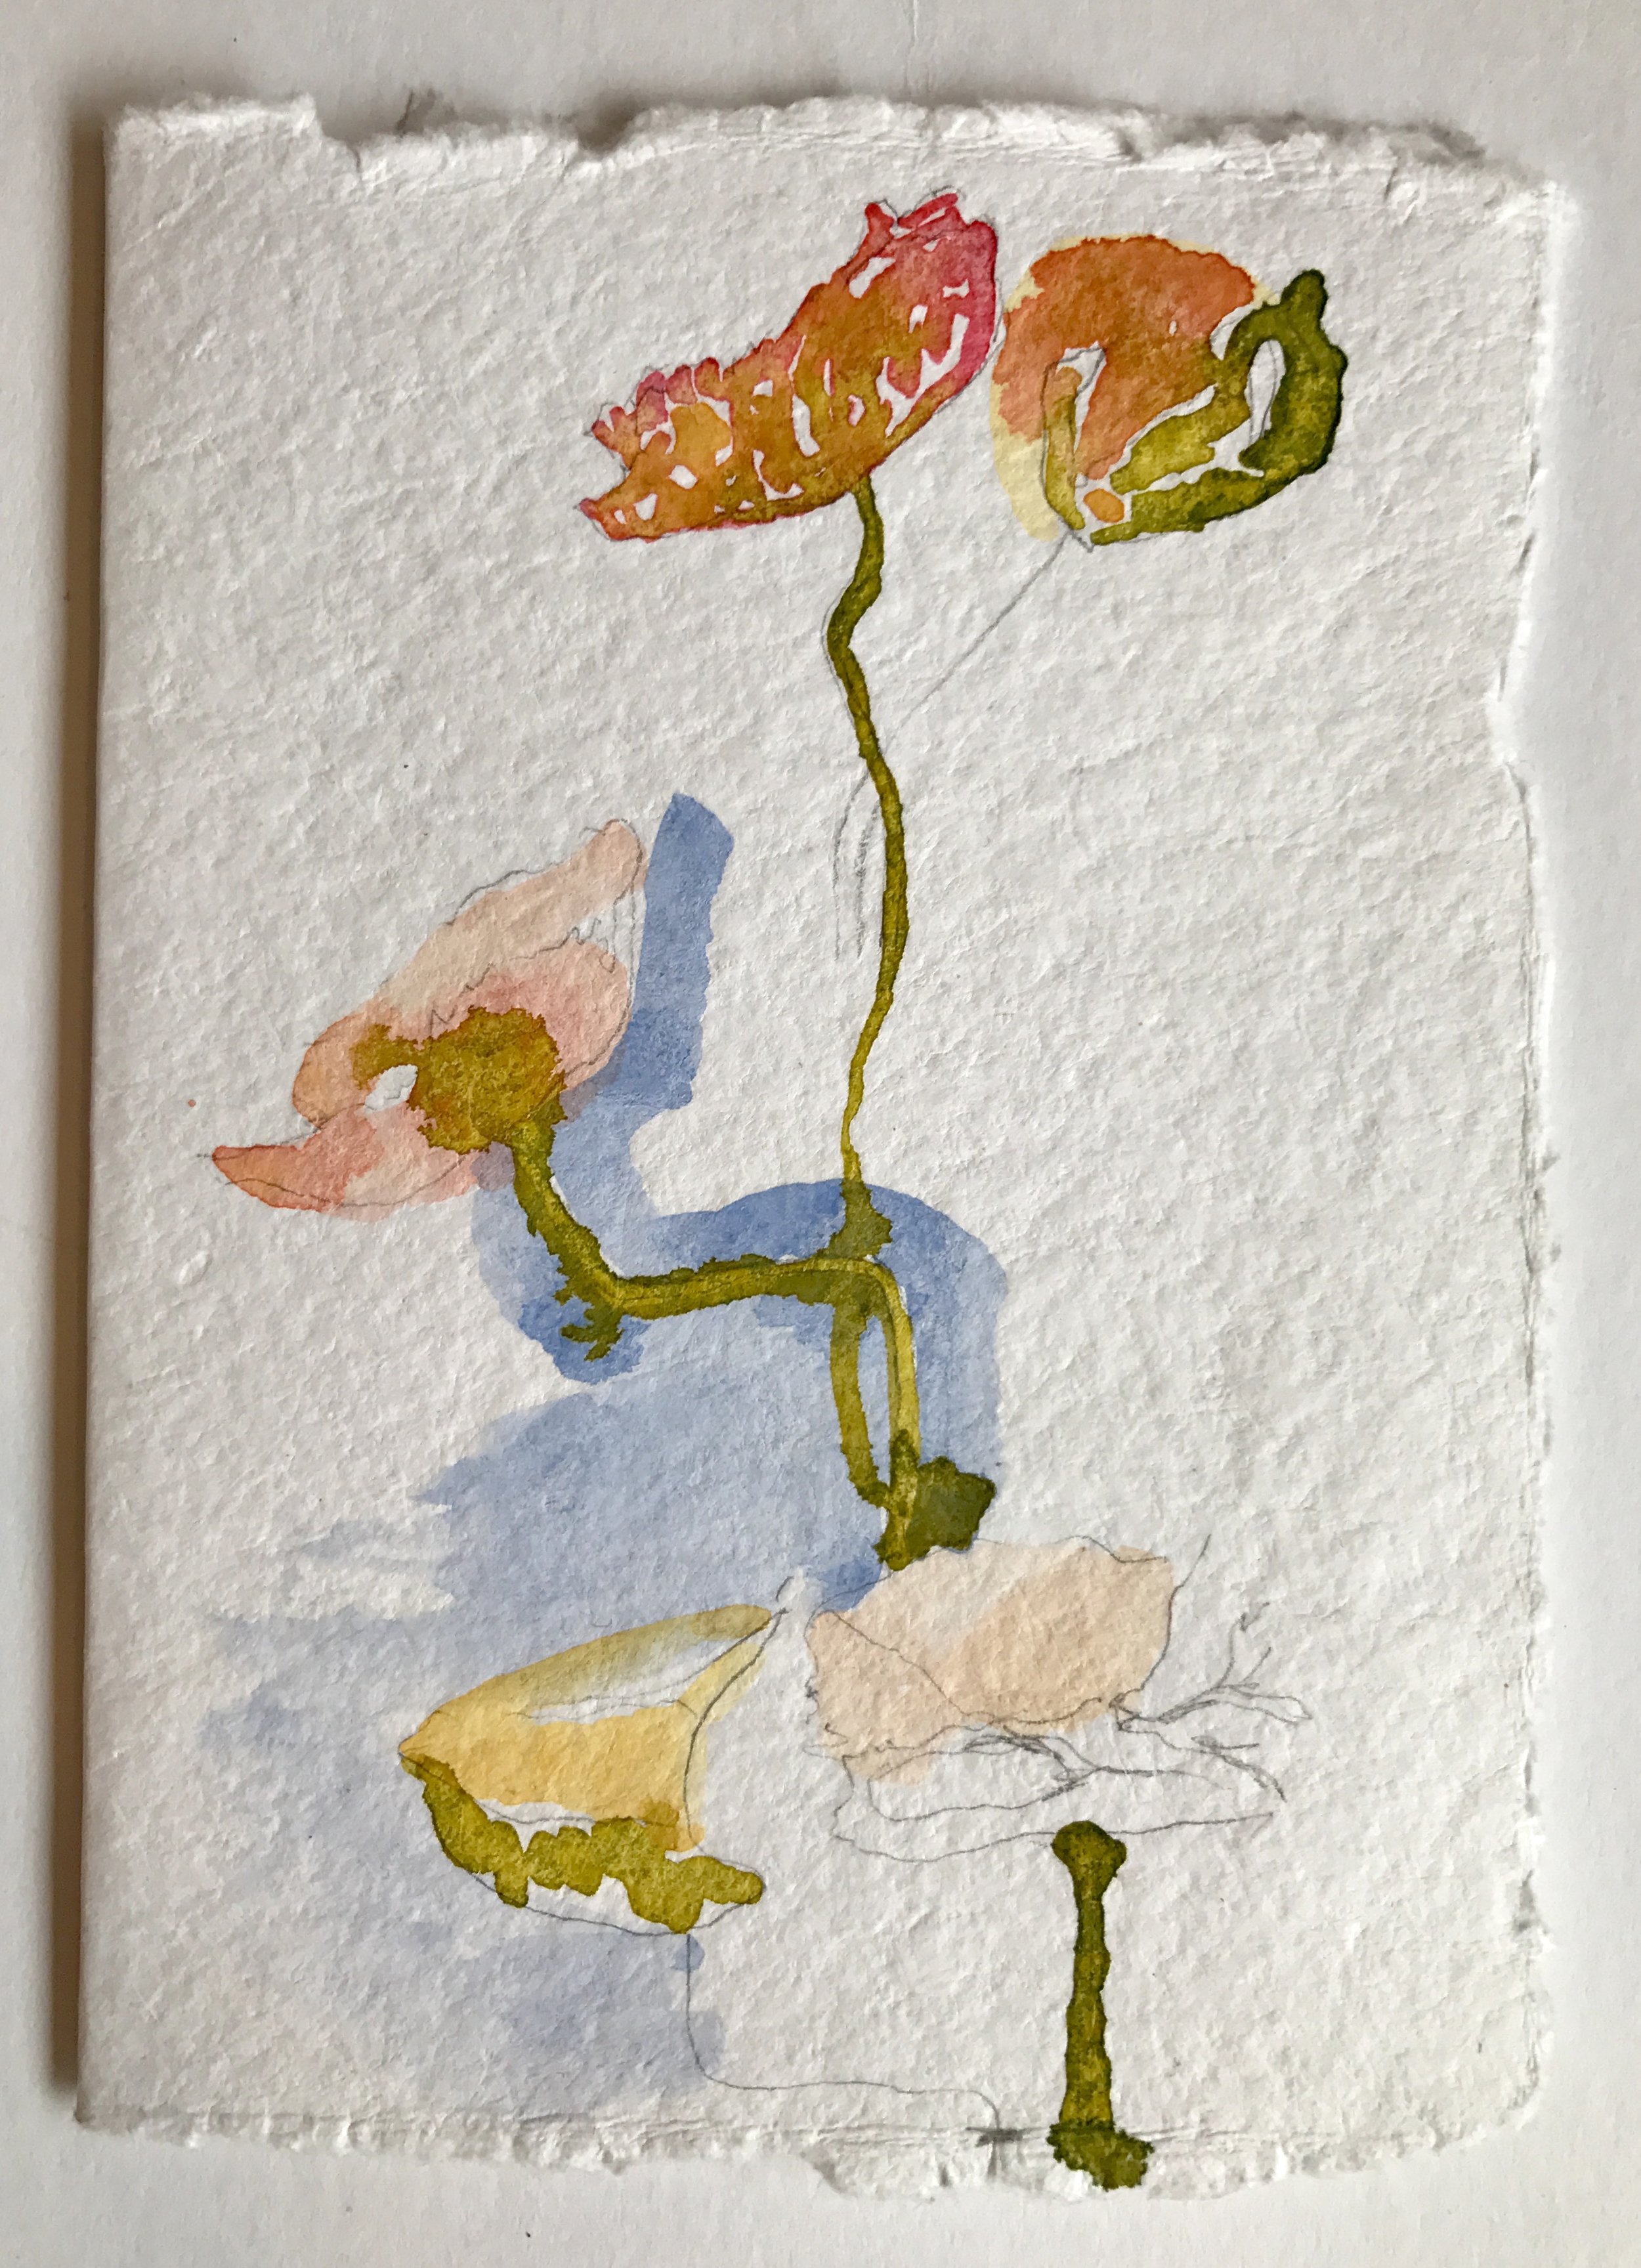  Watercolor greeting card  7x5 inches  Private Collection 